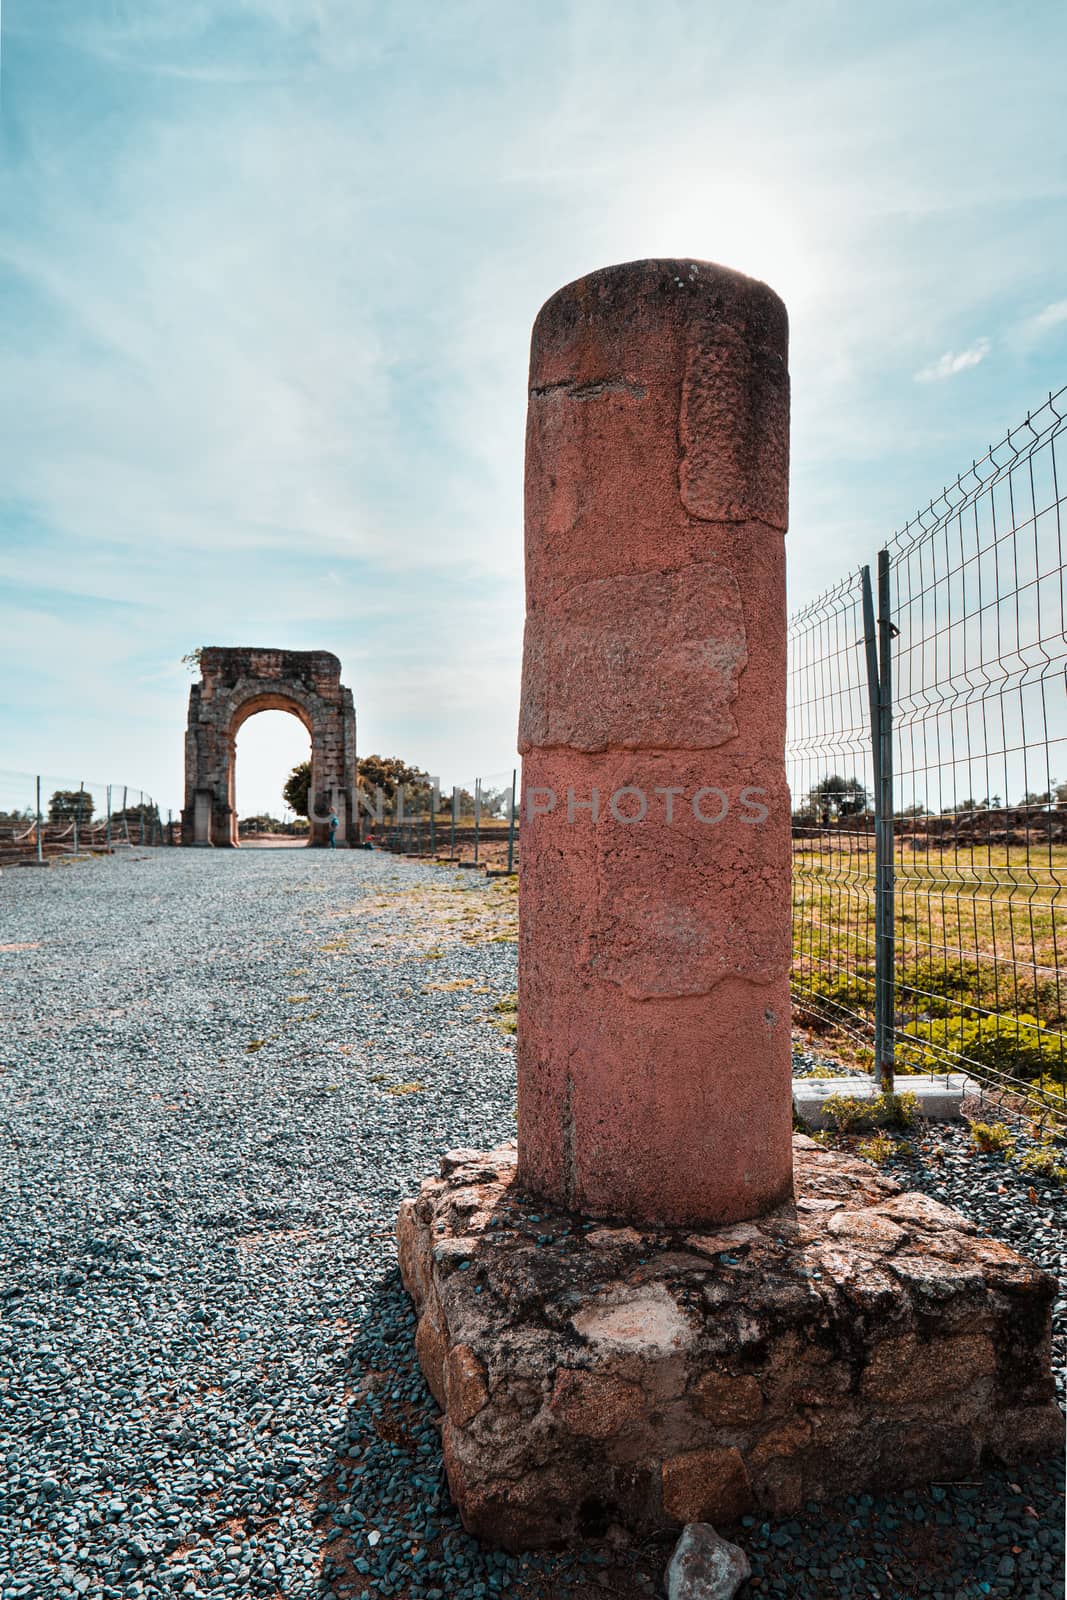 Column and Arch of Caparra, ancient roman city of Caparra in Extremadura, Spain by tanaonte